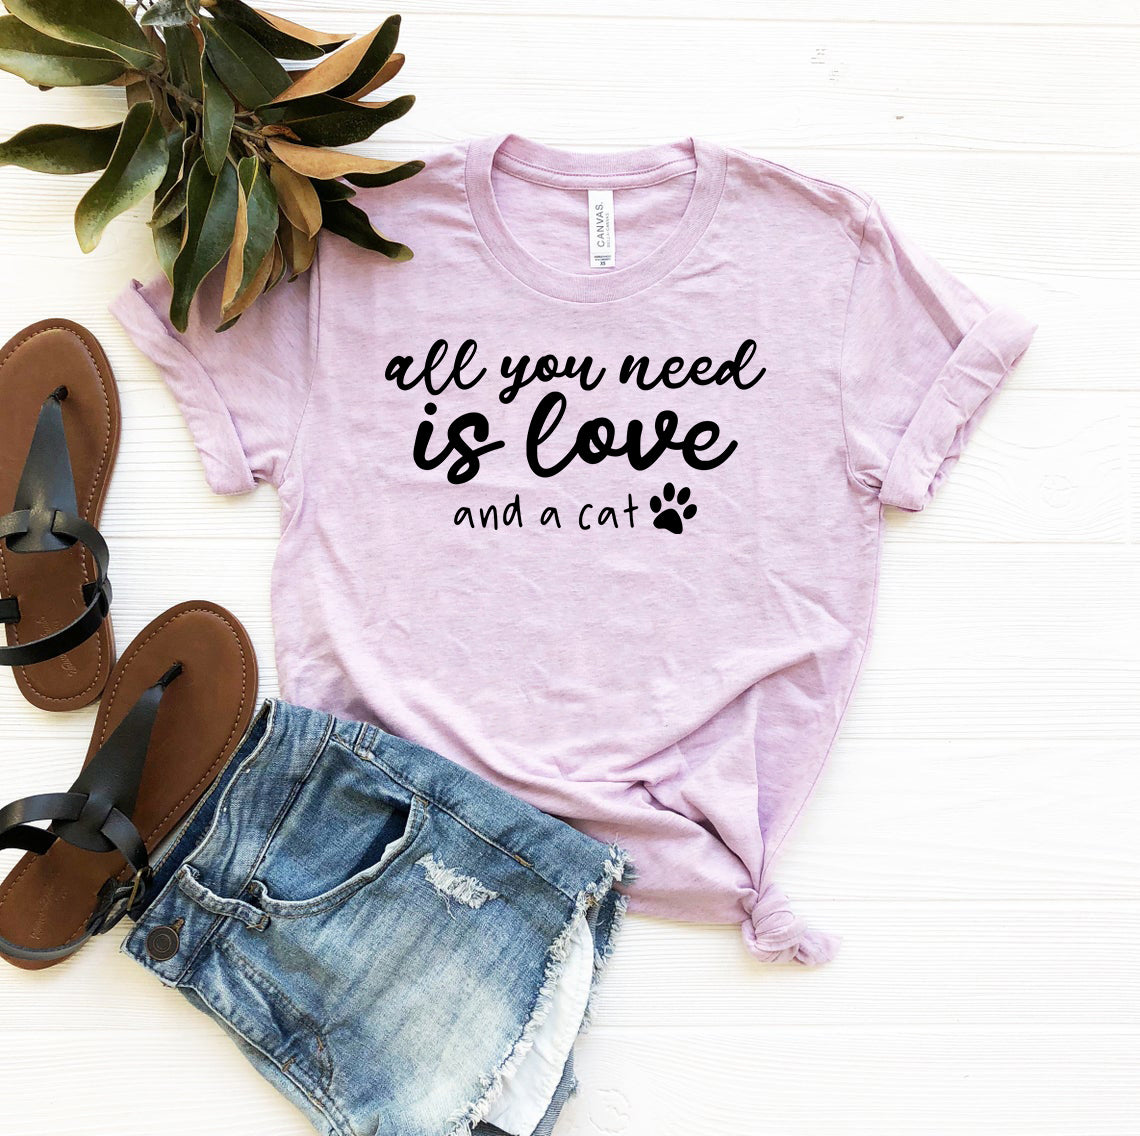 "All You Need Is Love and a Cat" T-Shirt